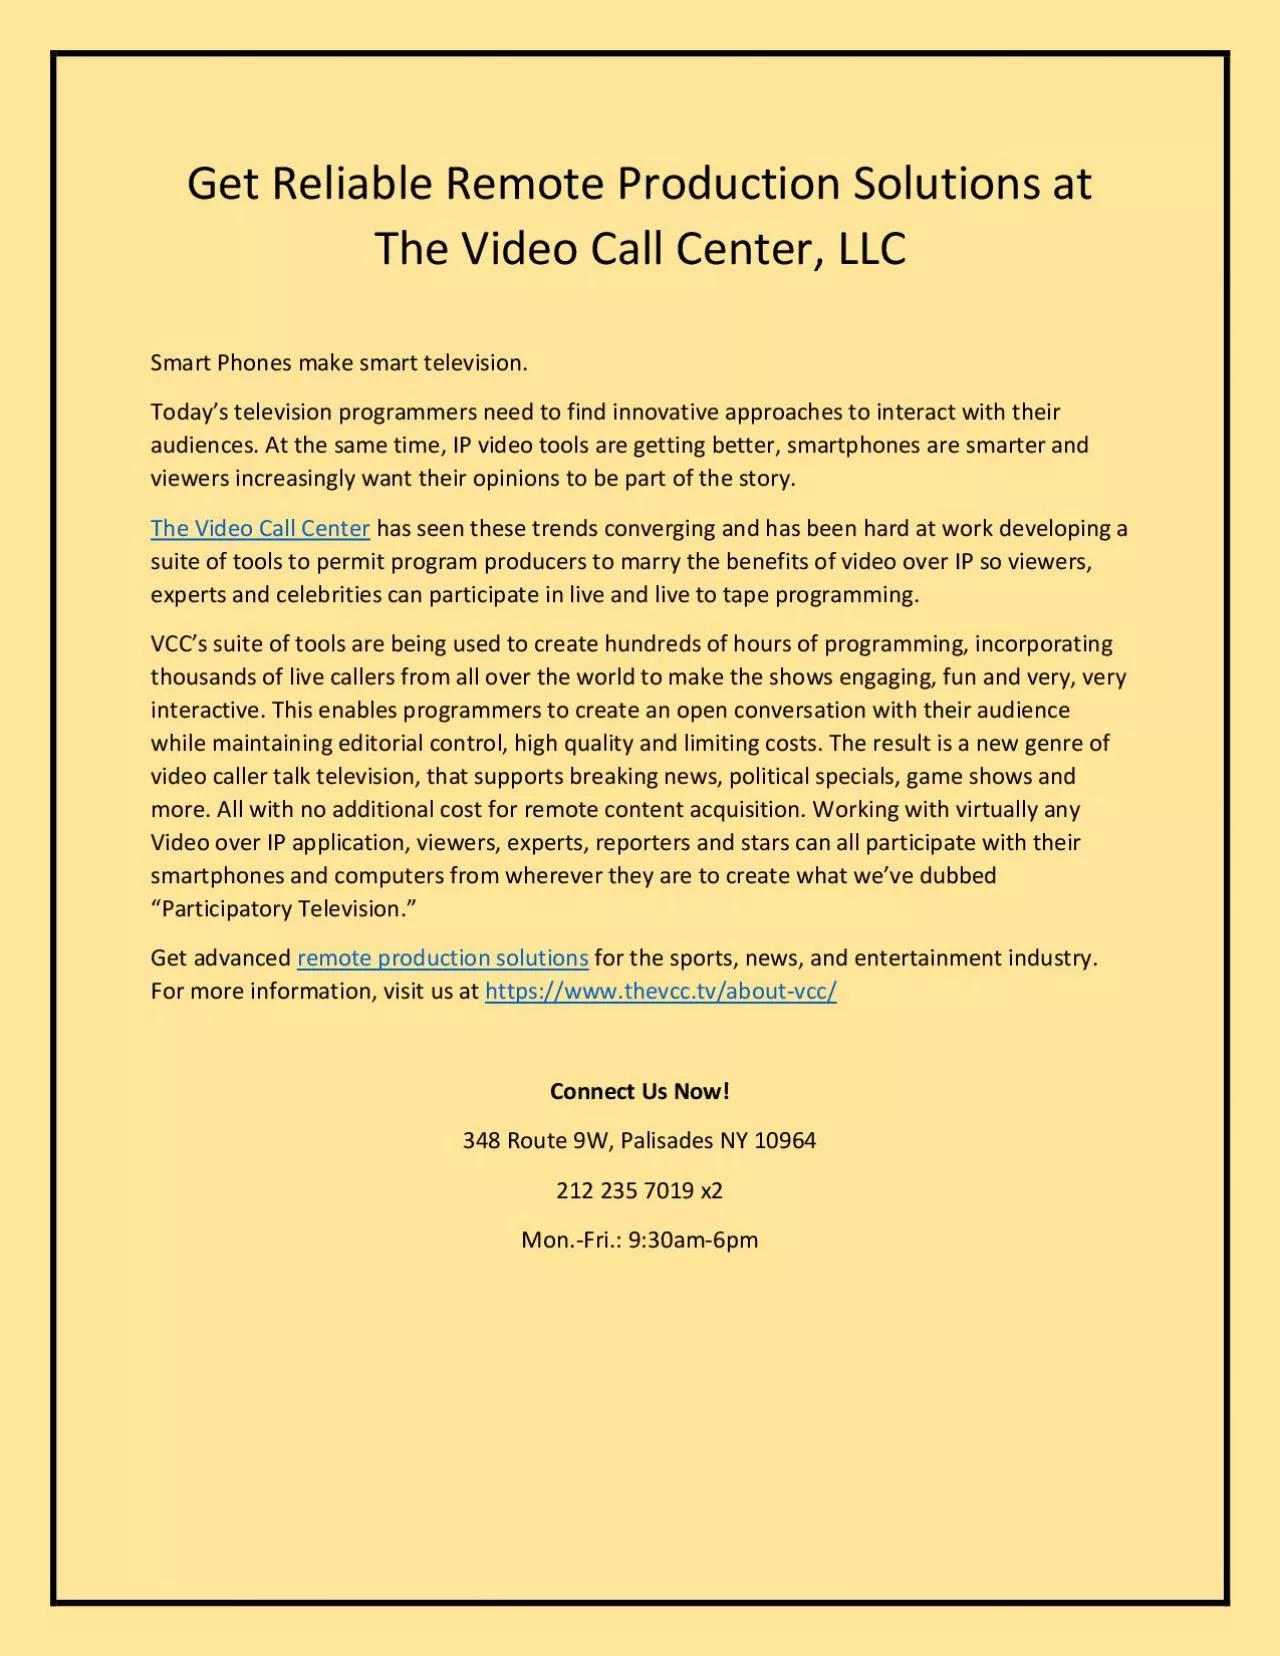 Get Reliable Remote Production Solutions at The Video Call Center, LLC